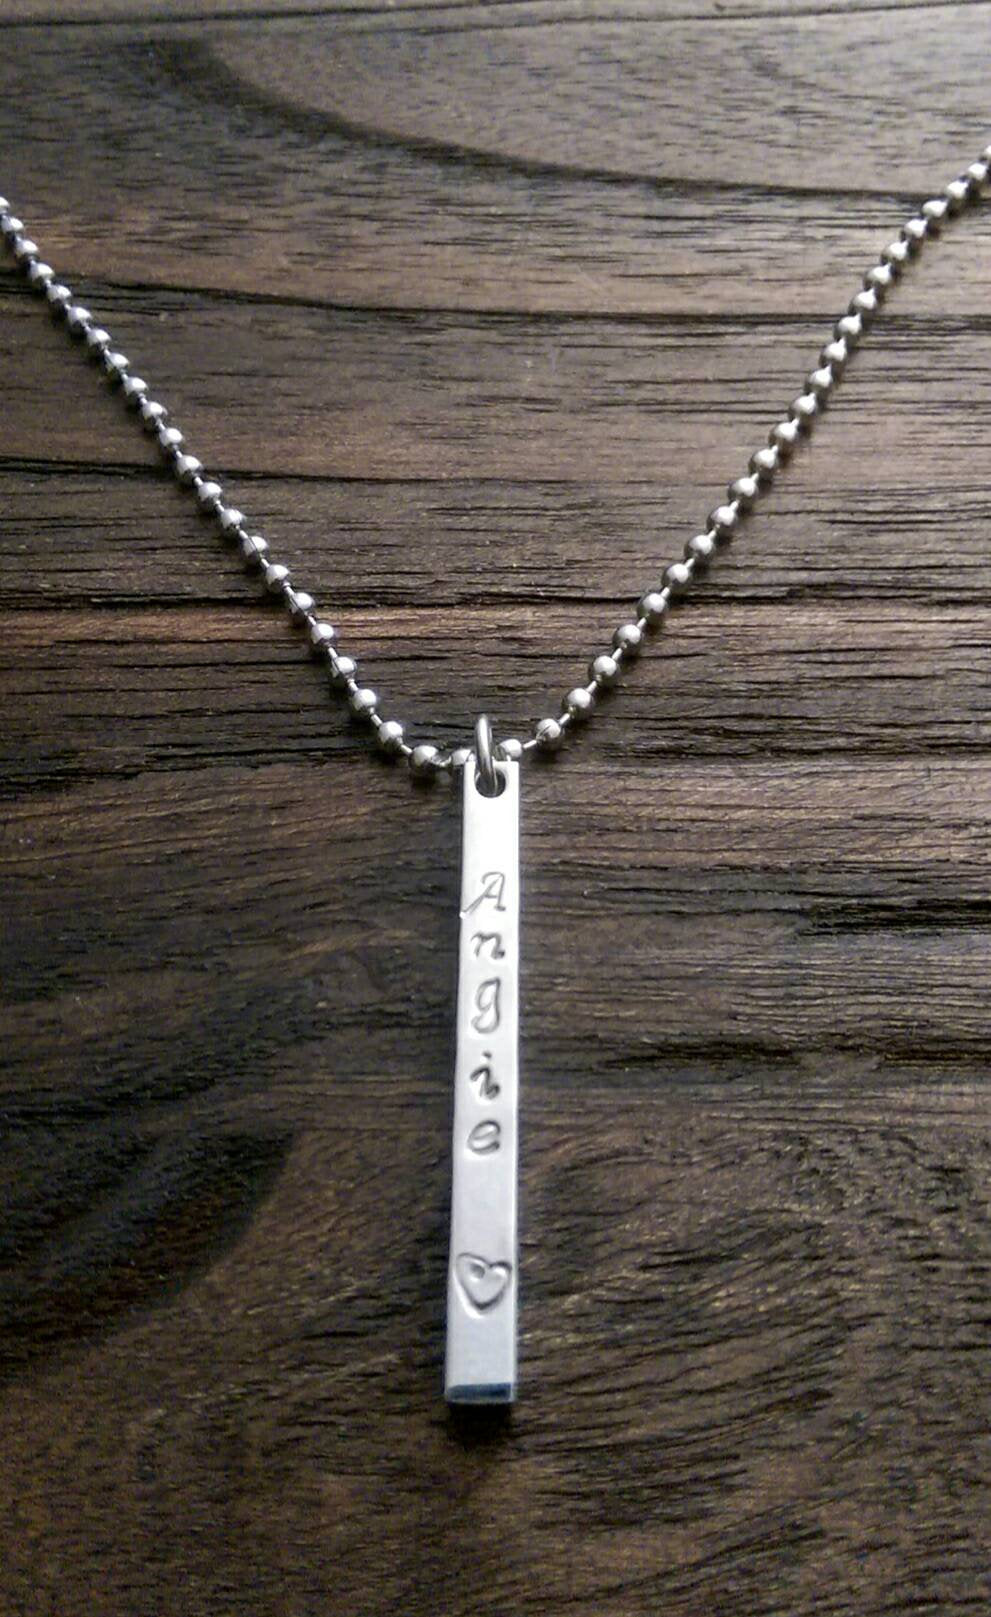 Personalised Name Stamped Necklace Bar Stainless Steel, 4 Sided Bar Pendant Necklace - Silver and Resin Designs